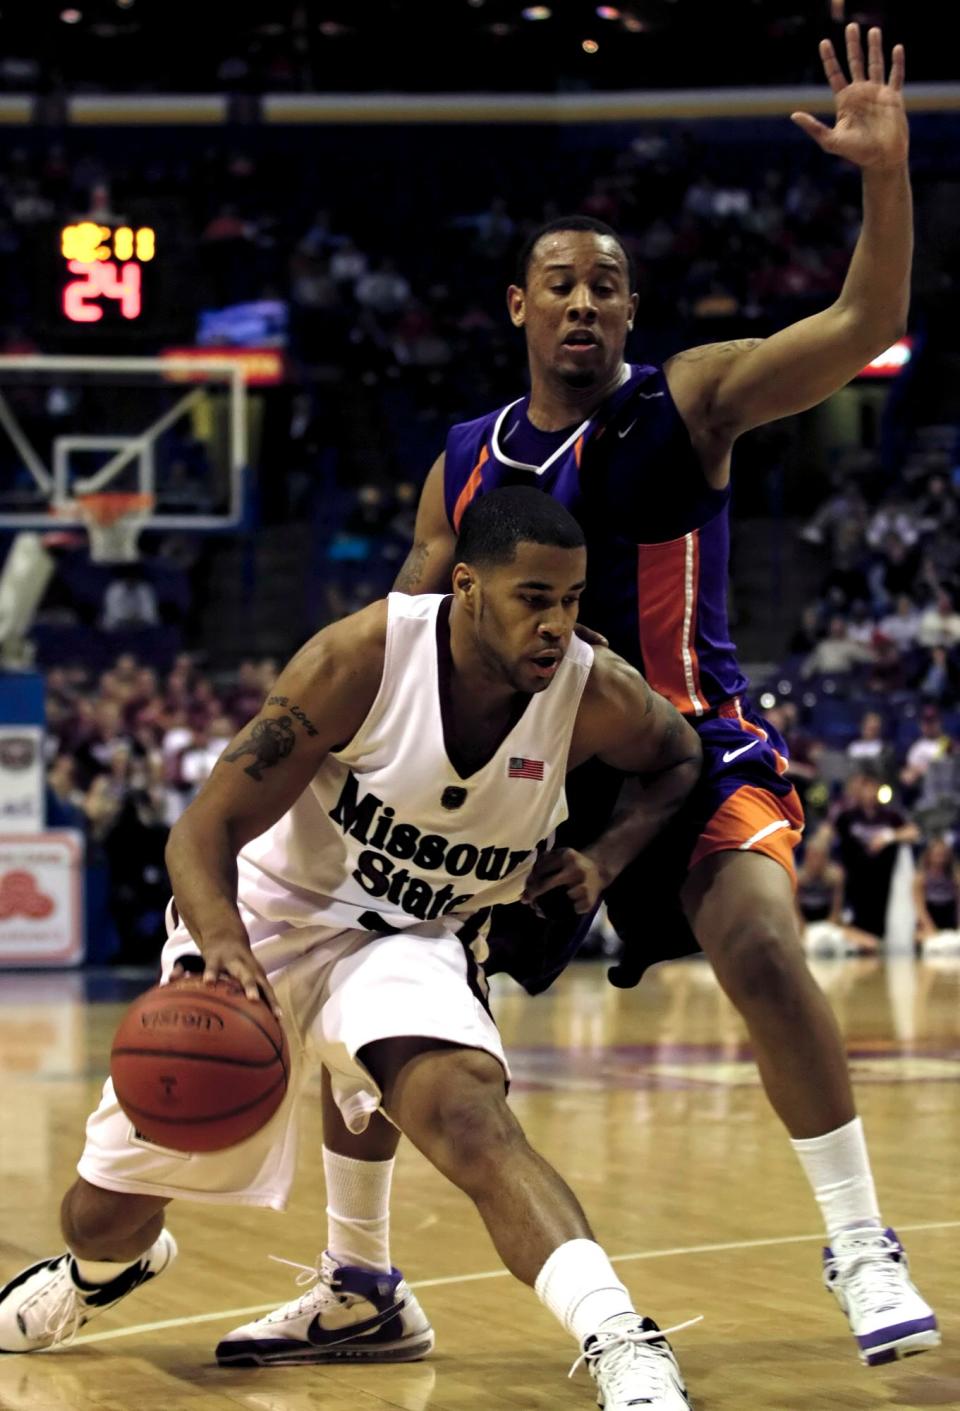 Missouri State's Dale Lamberth tries to drive around Evansville's Nate Garner in a Missouri Valley conference tournament first round basketball game, Thursday, March 6, 2008, in St. Louis.